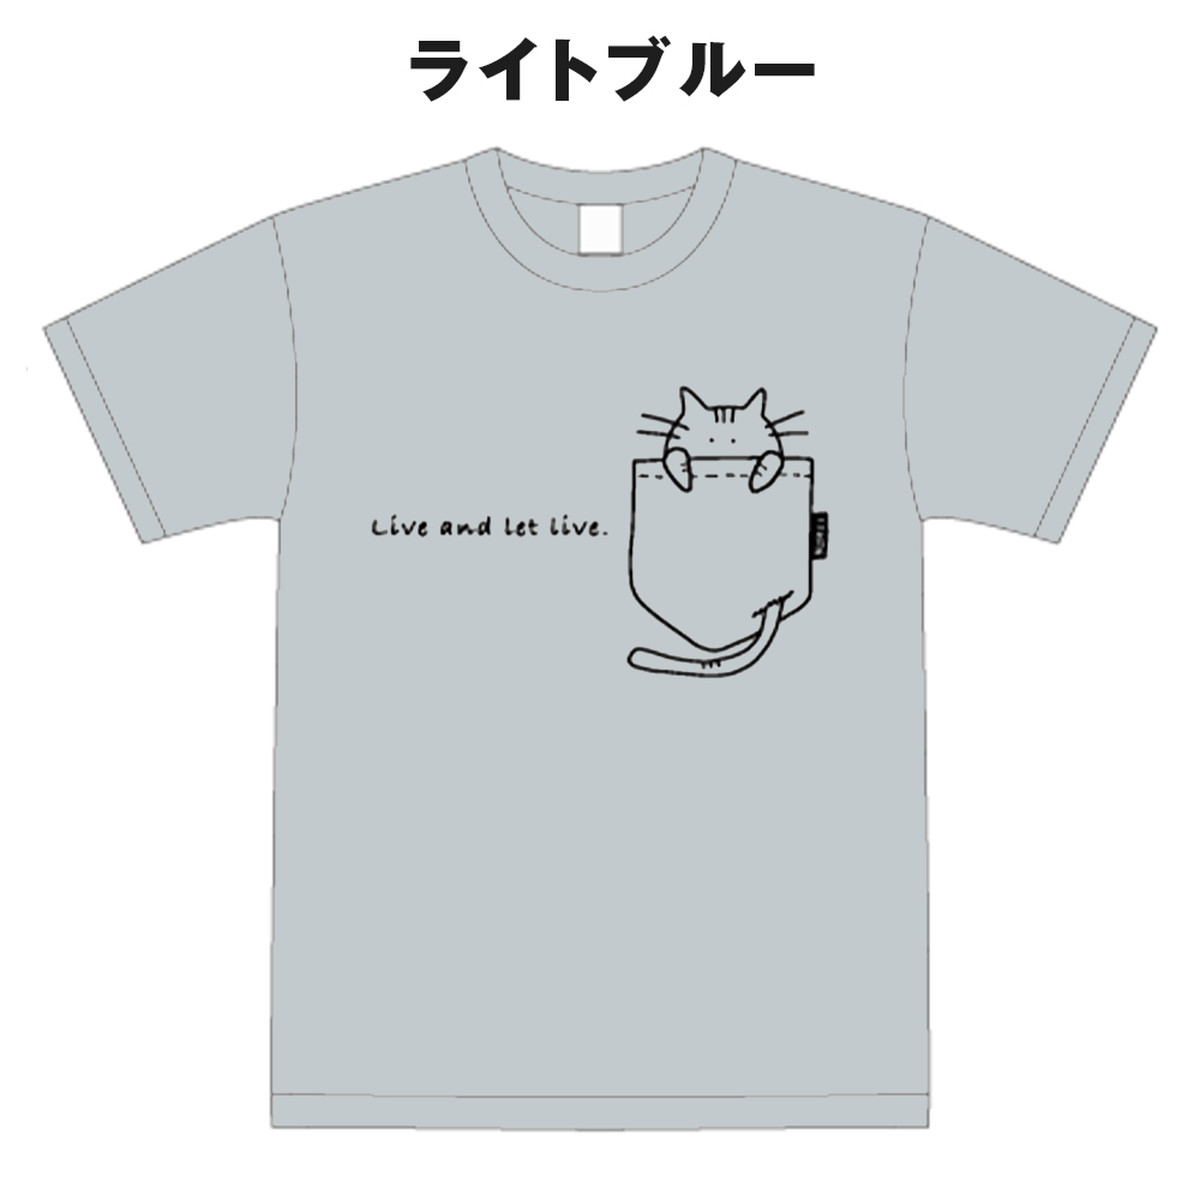 Tシャツ ゆるふわポケット猫 Live And Let Live 無名劇団 Online Shop